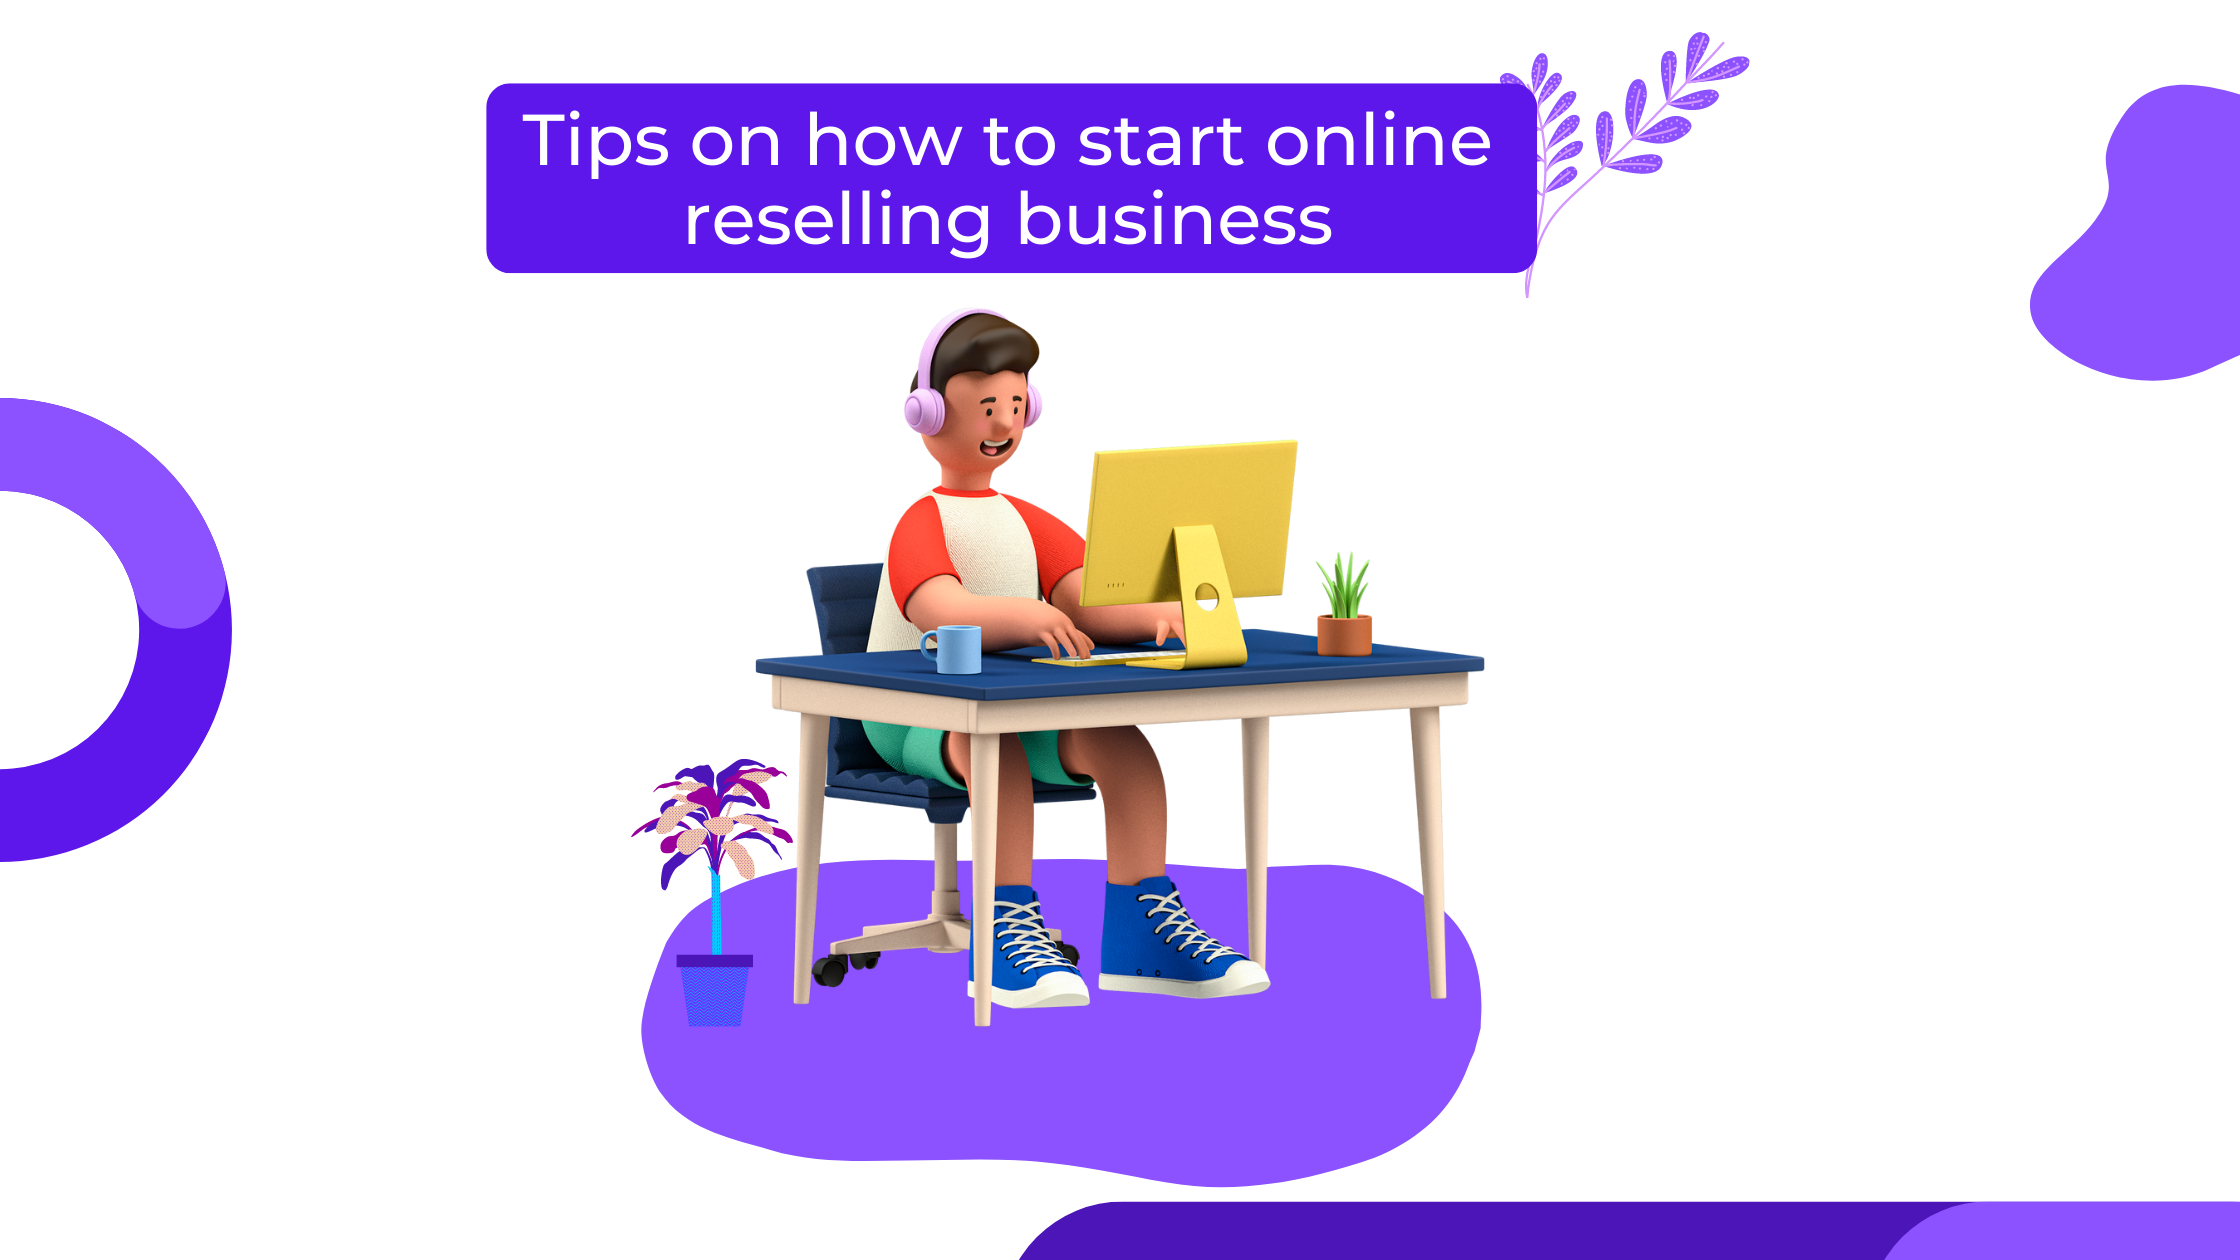 Tips on how to start online reselling business